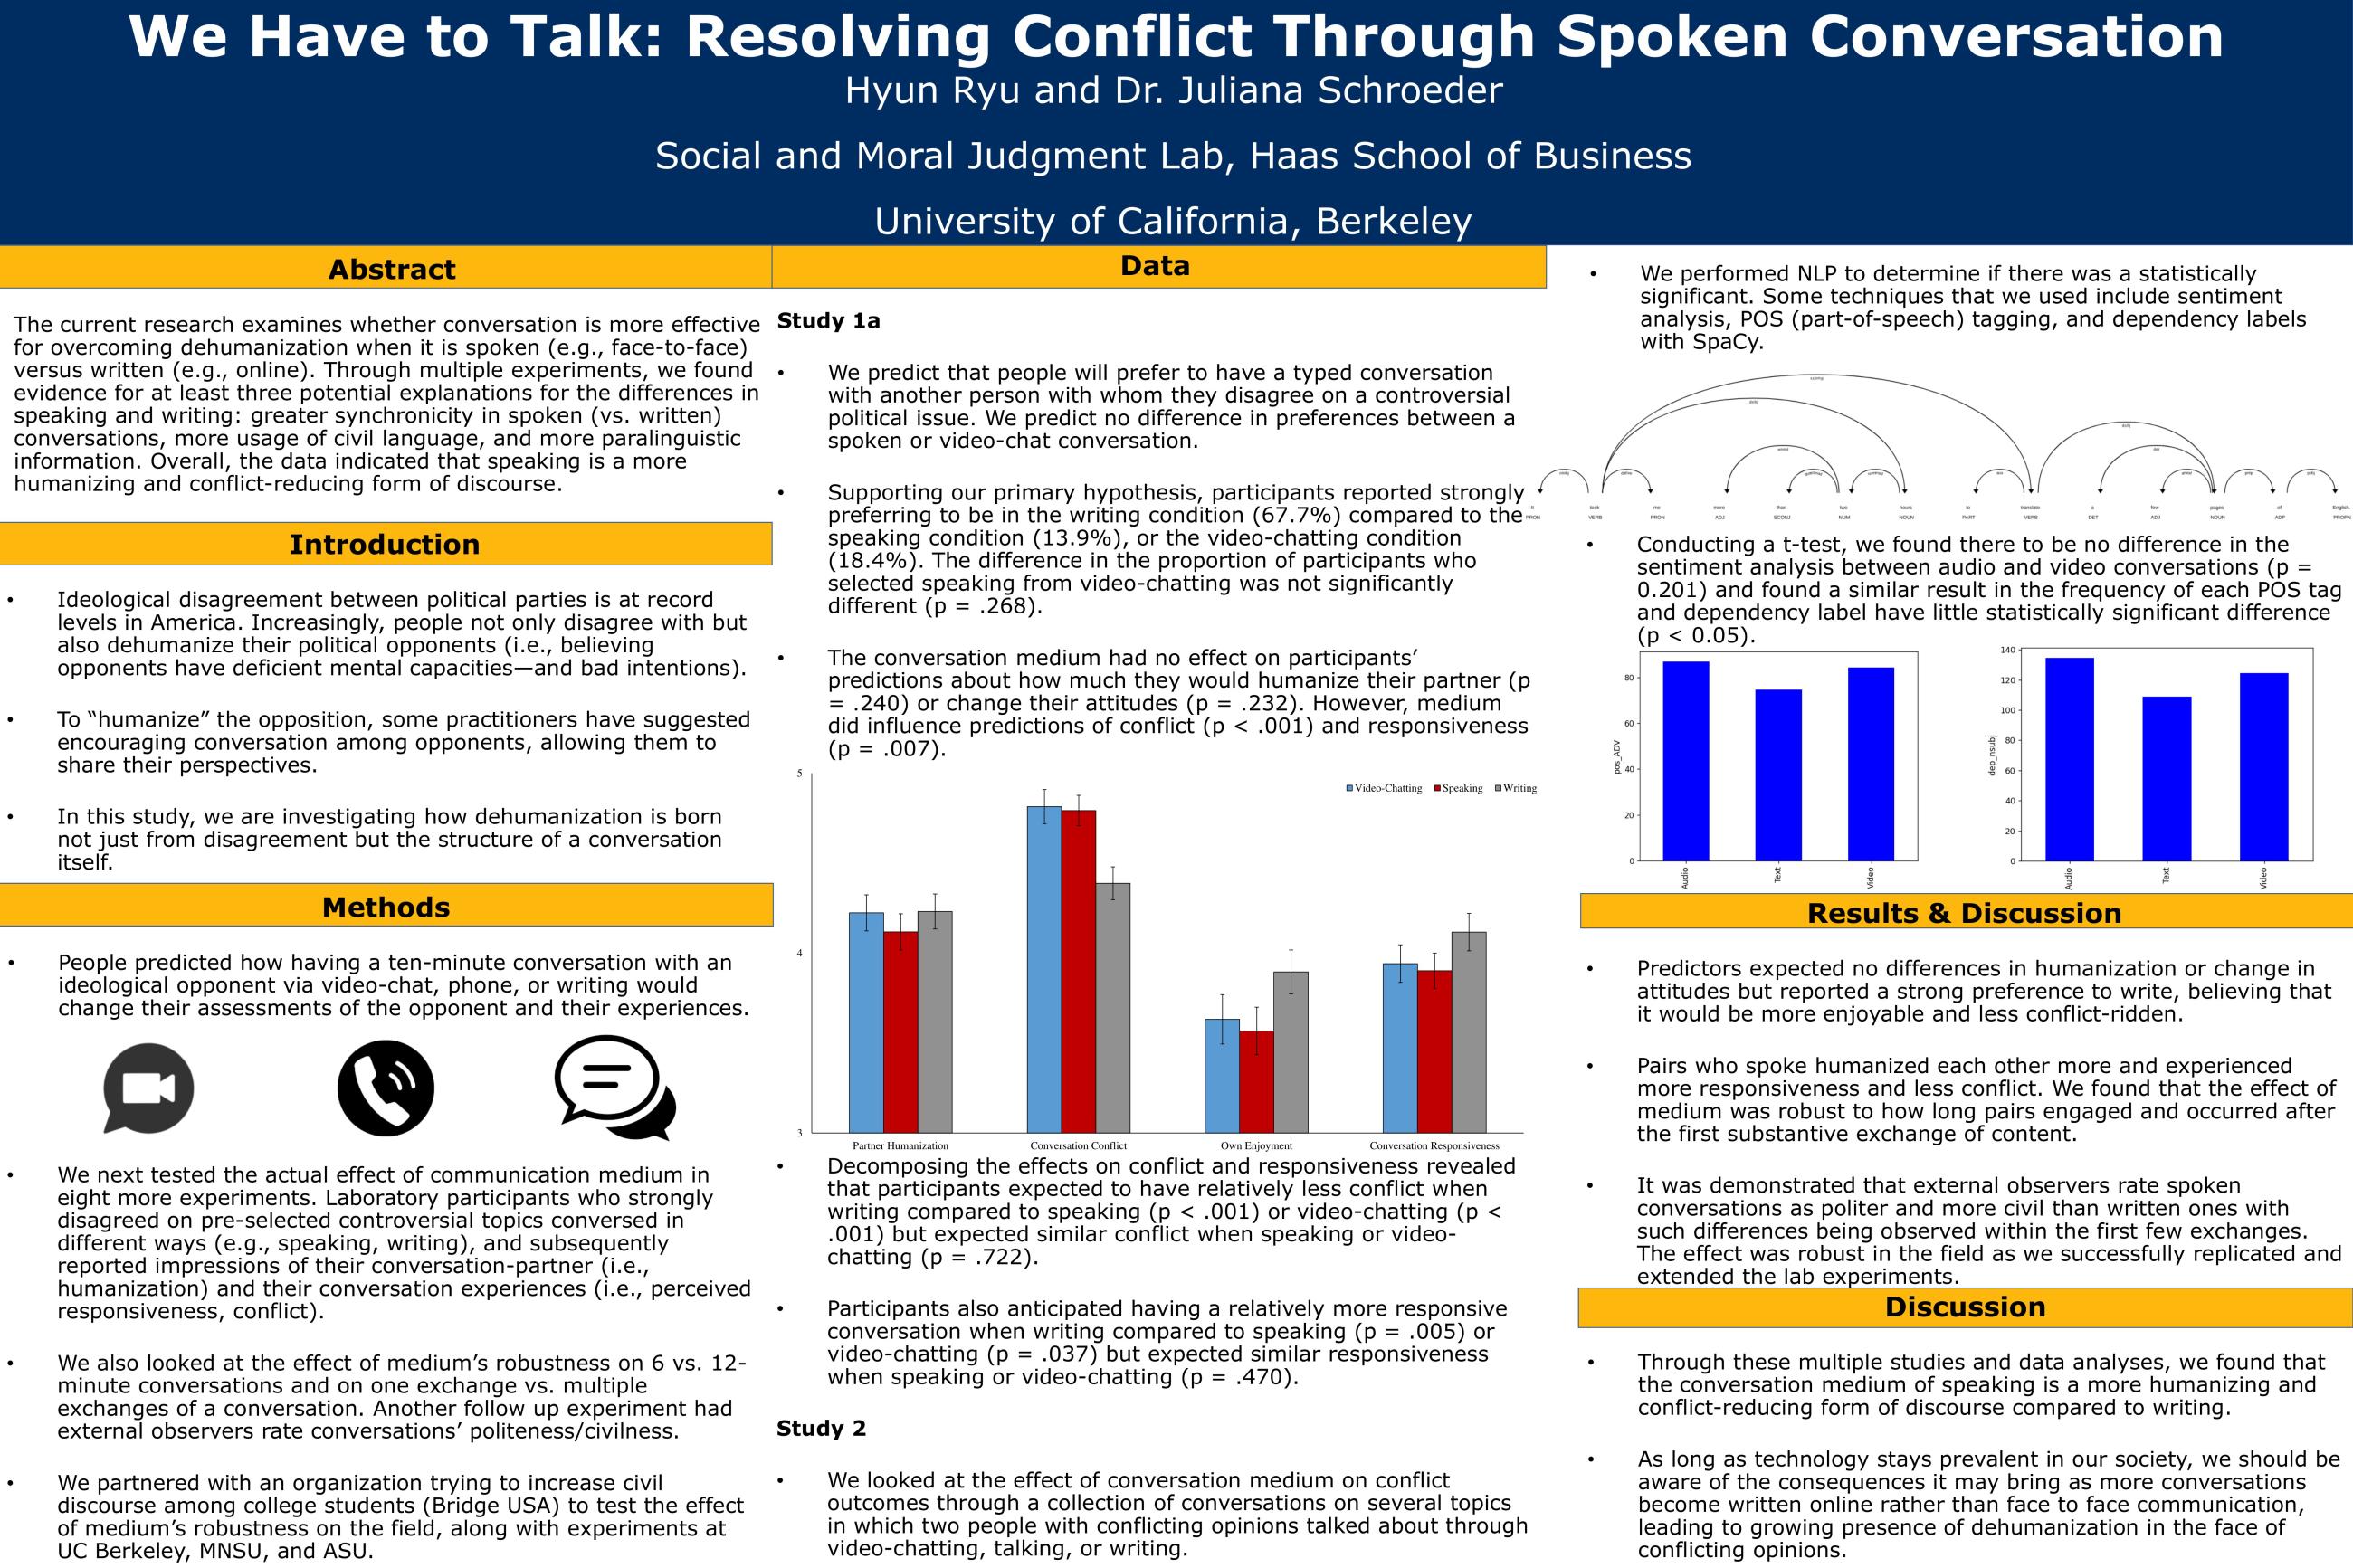 We Have to Talk: Resolving Conflict Through Spoken Conversation - Spring 2023 Discovery Project